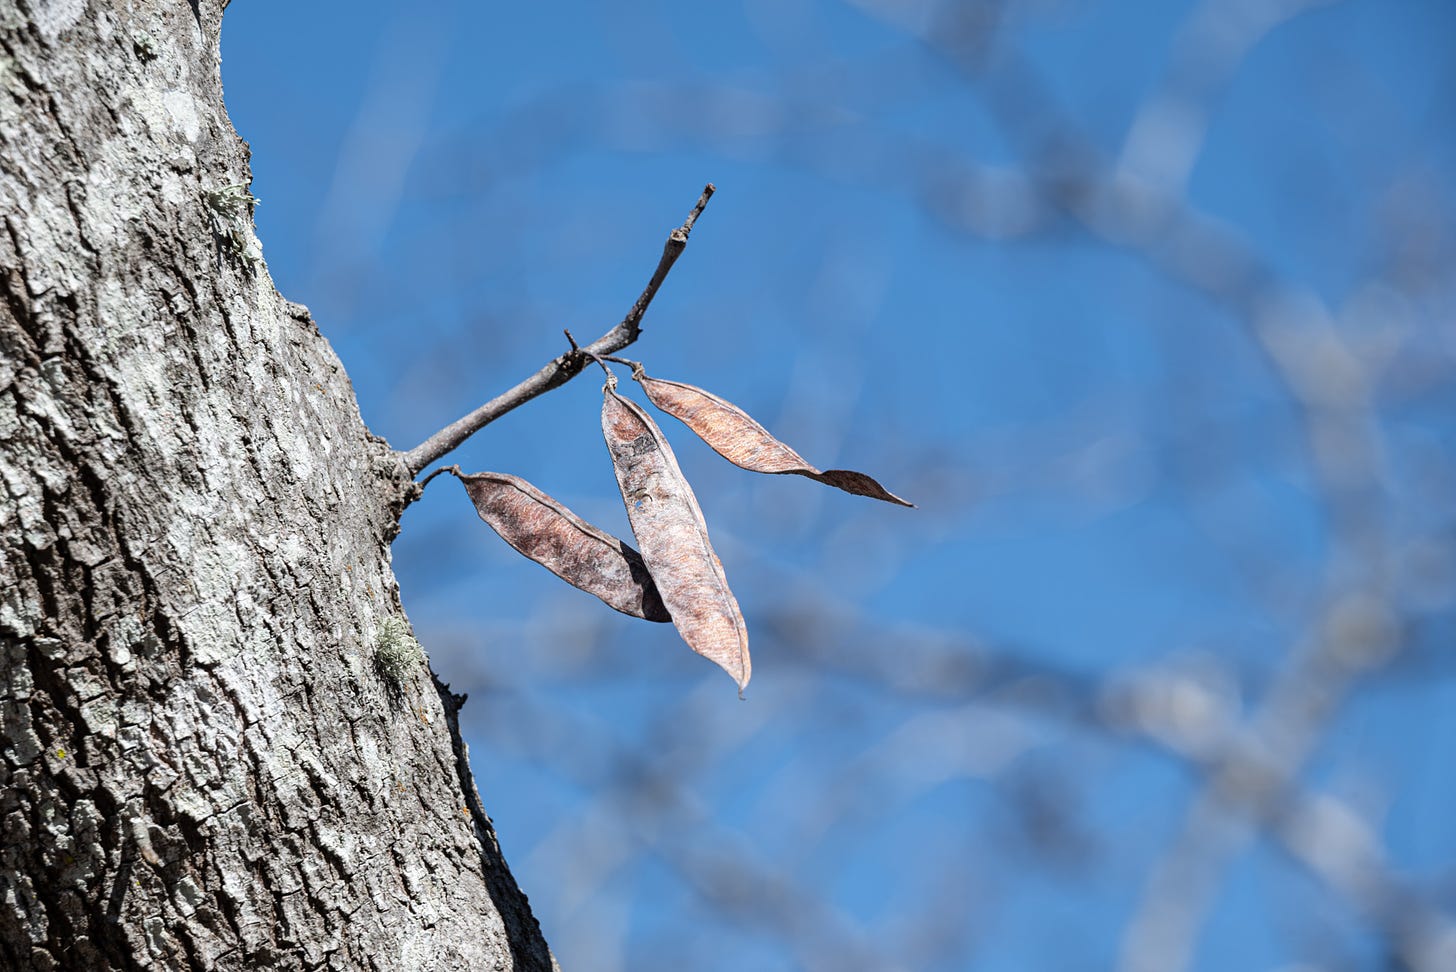 Three dried seed pods cling to a short branch of a Red Bud tree with the blue sky and other limbs blurred in the background